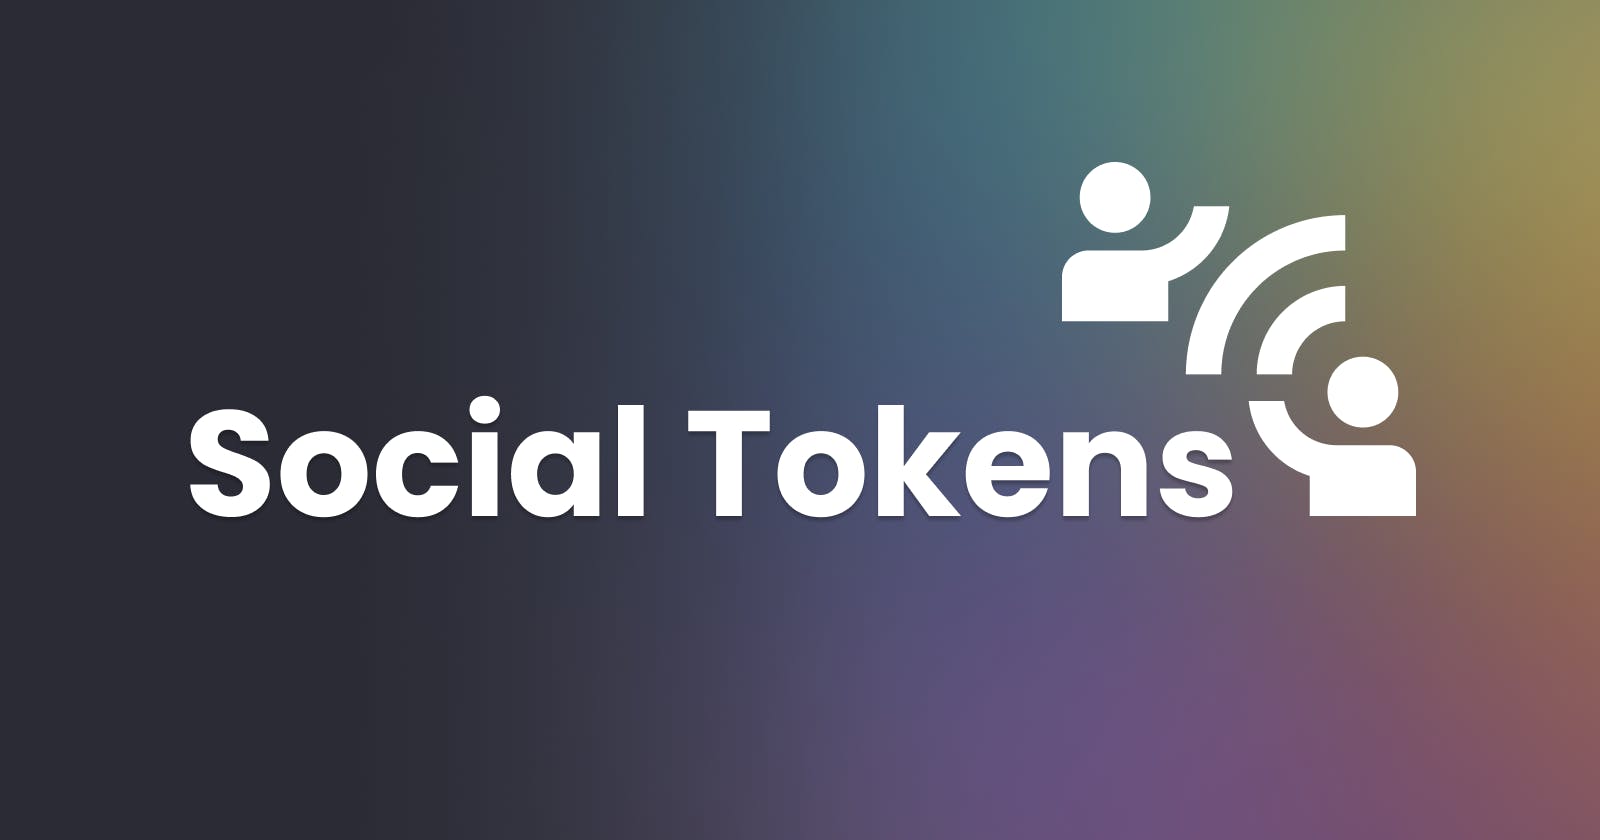 Social Tokens - Who, what, why and How?